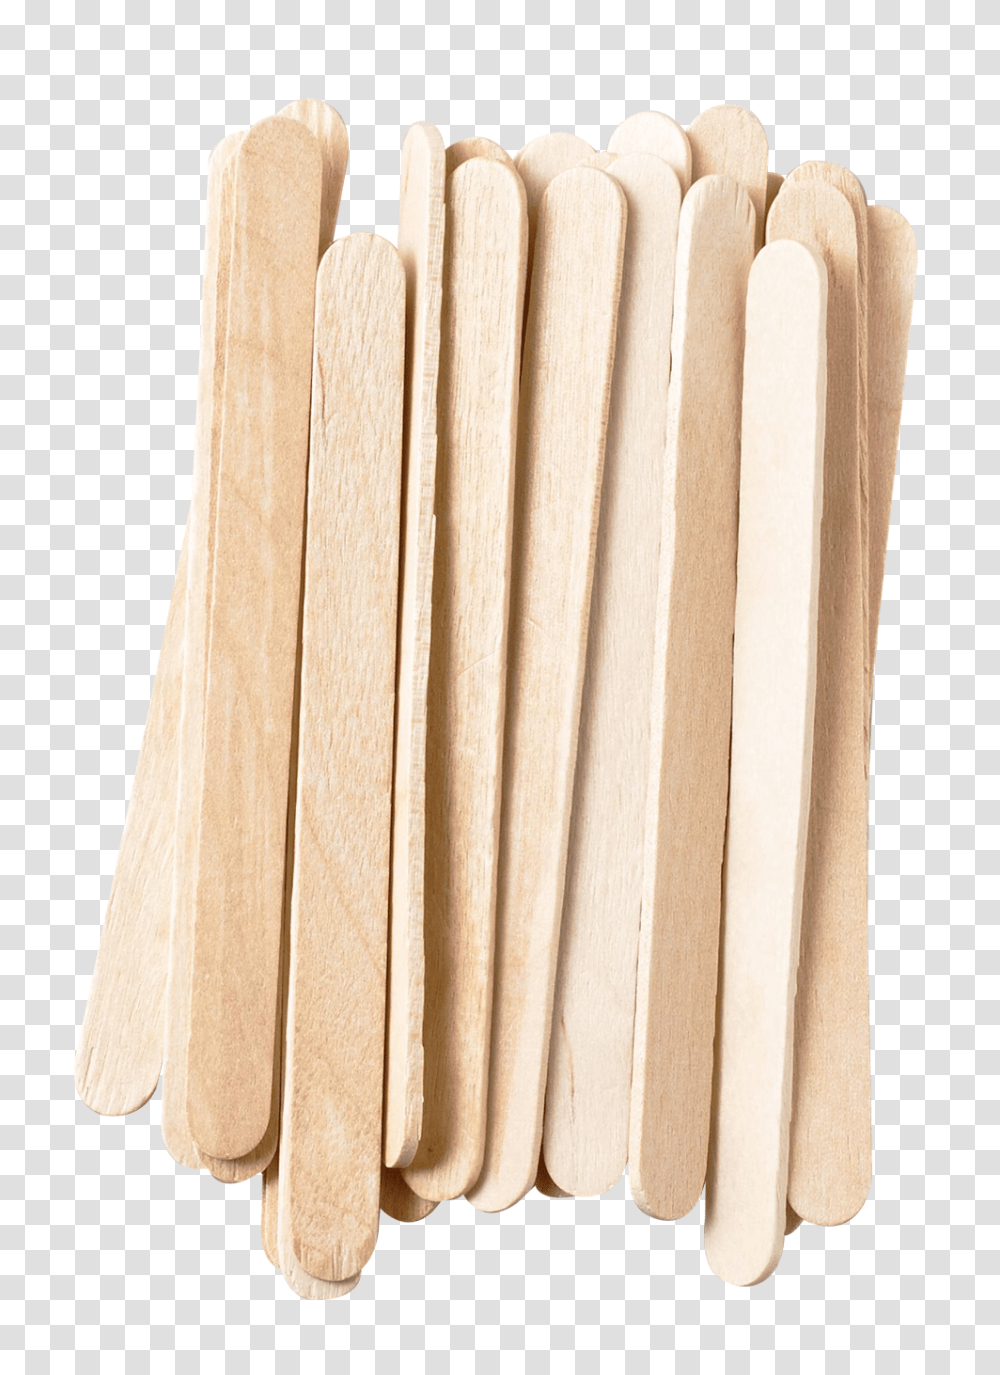 Ice Cream Stick Image, Wood, Fence, Overcoat Transparent Png